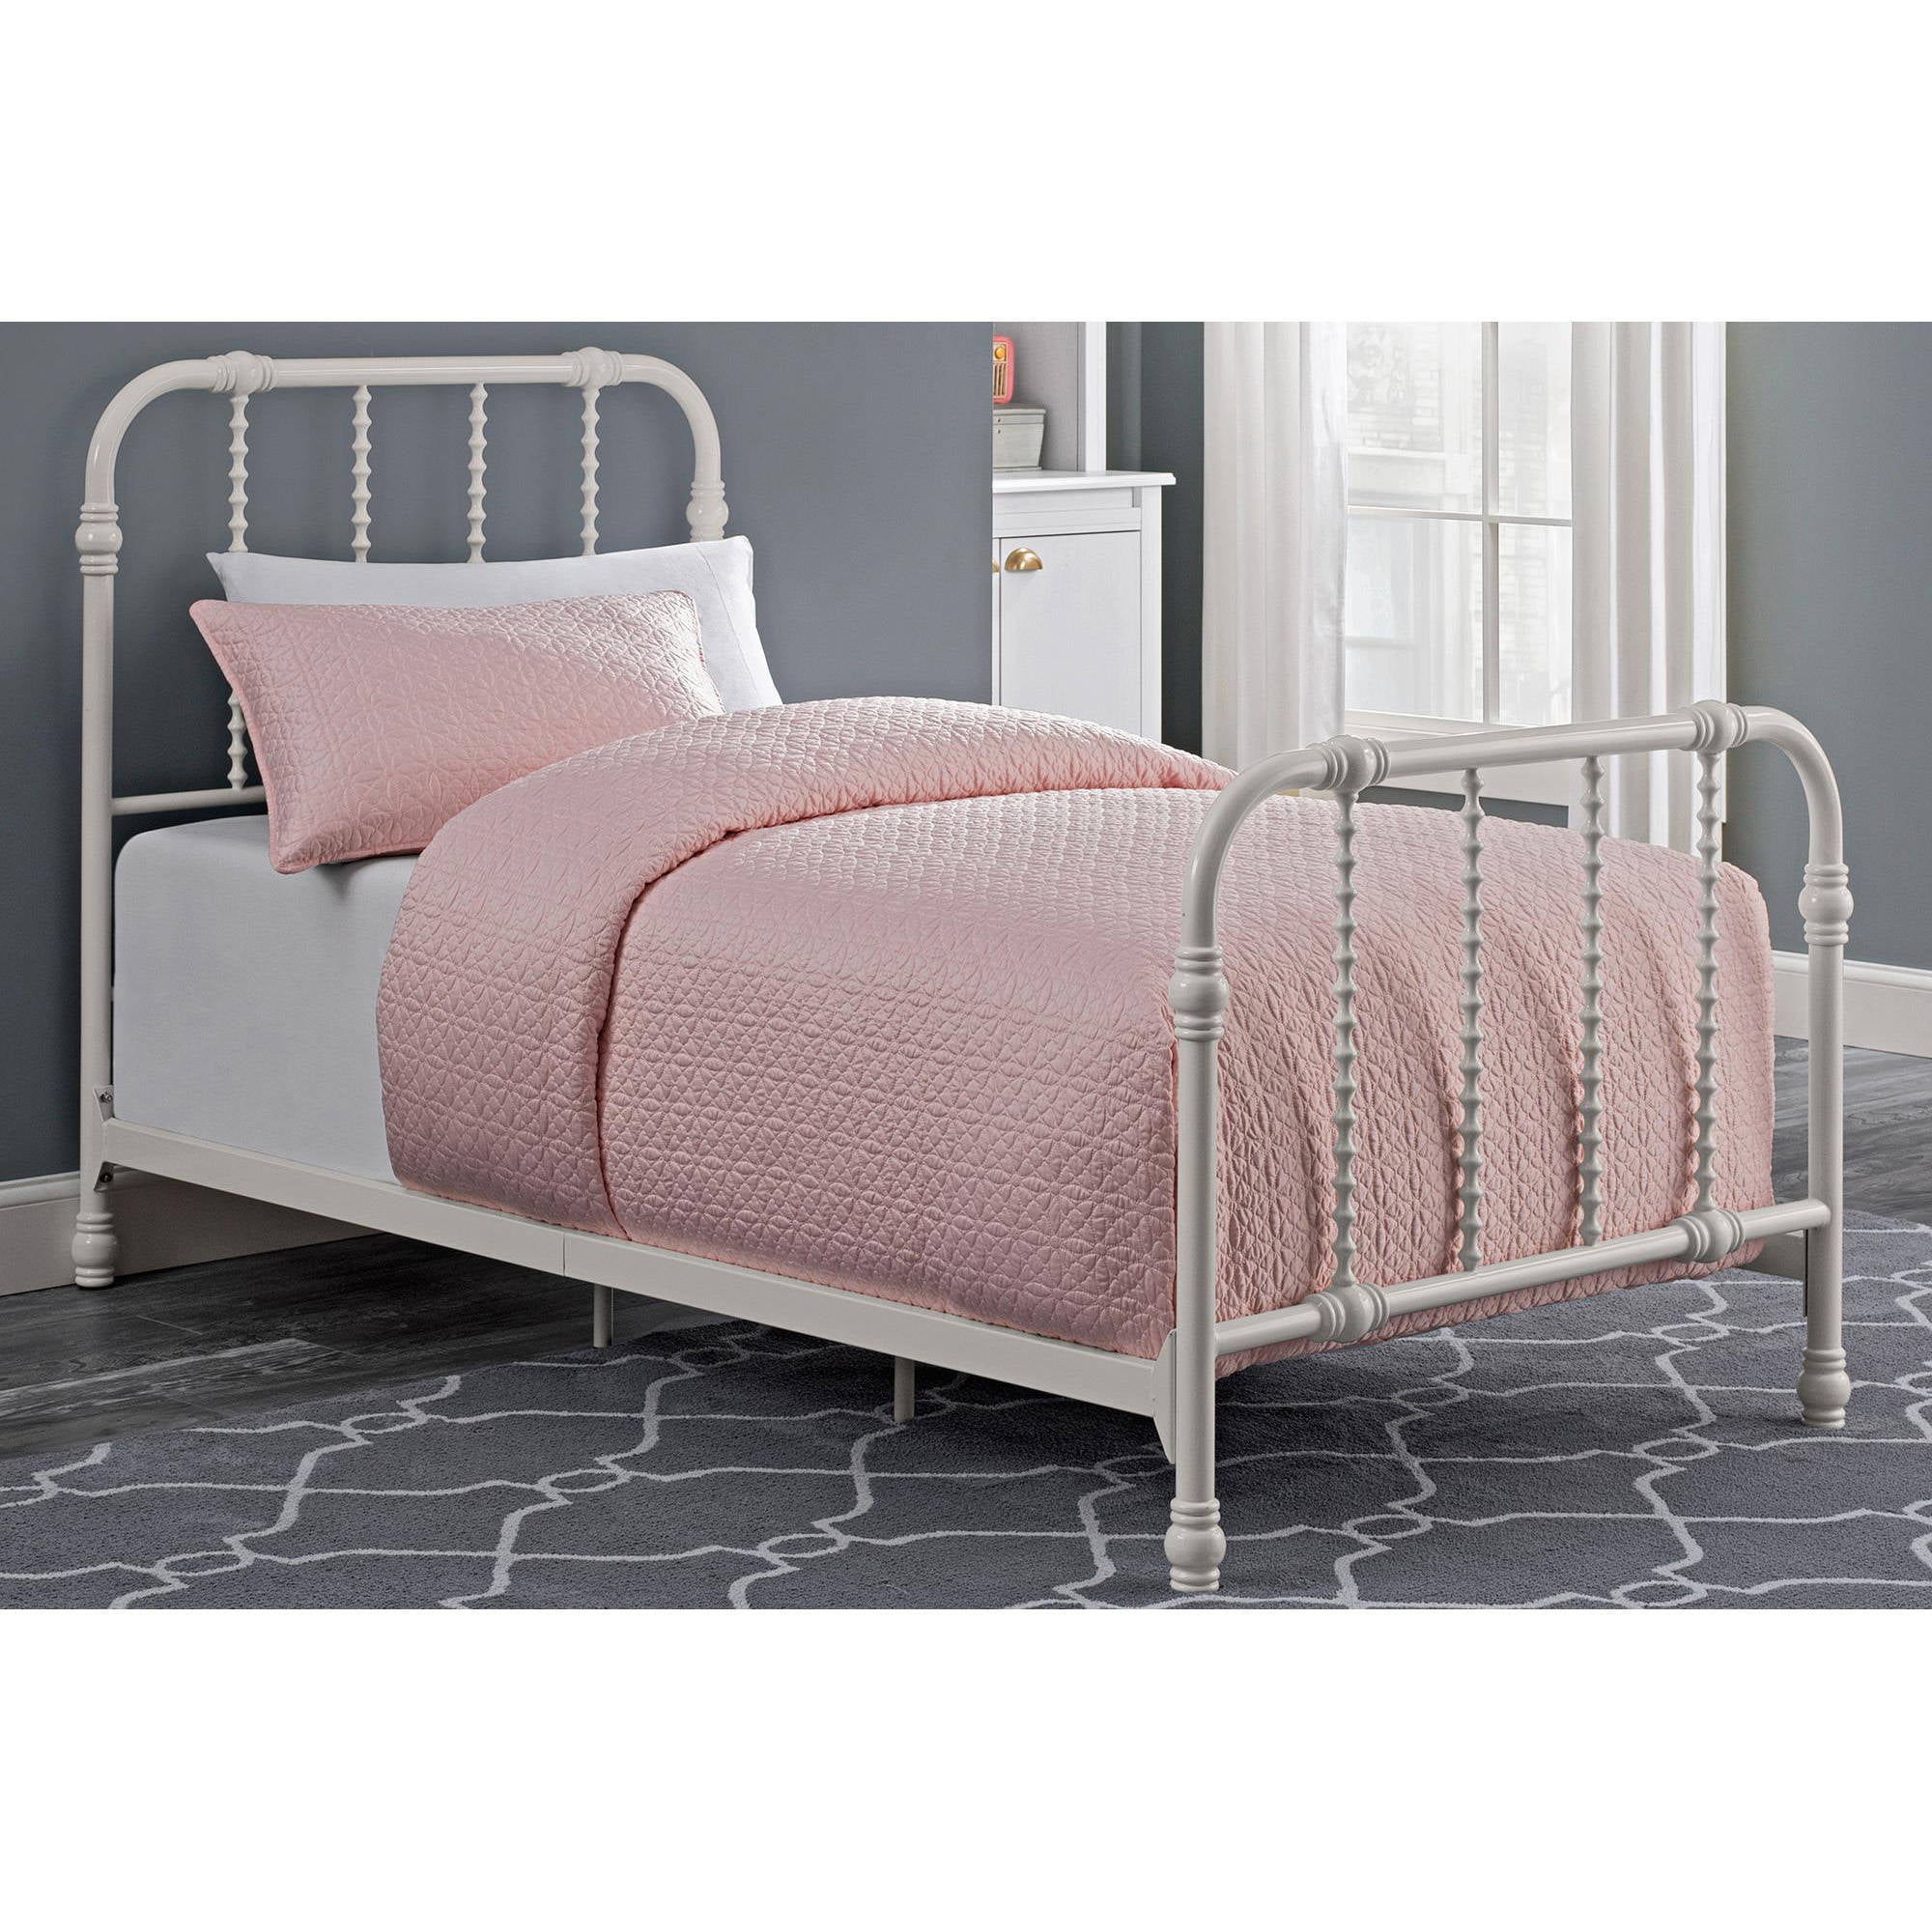 Ajh Jenny Lind Twin Bed Target, White Jenny Lind Twin Bed